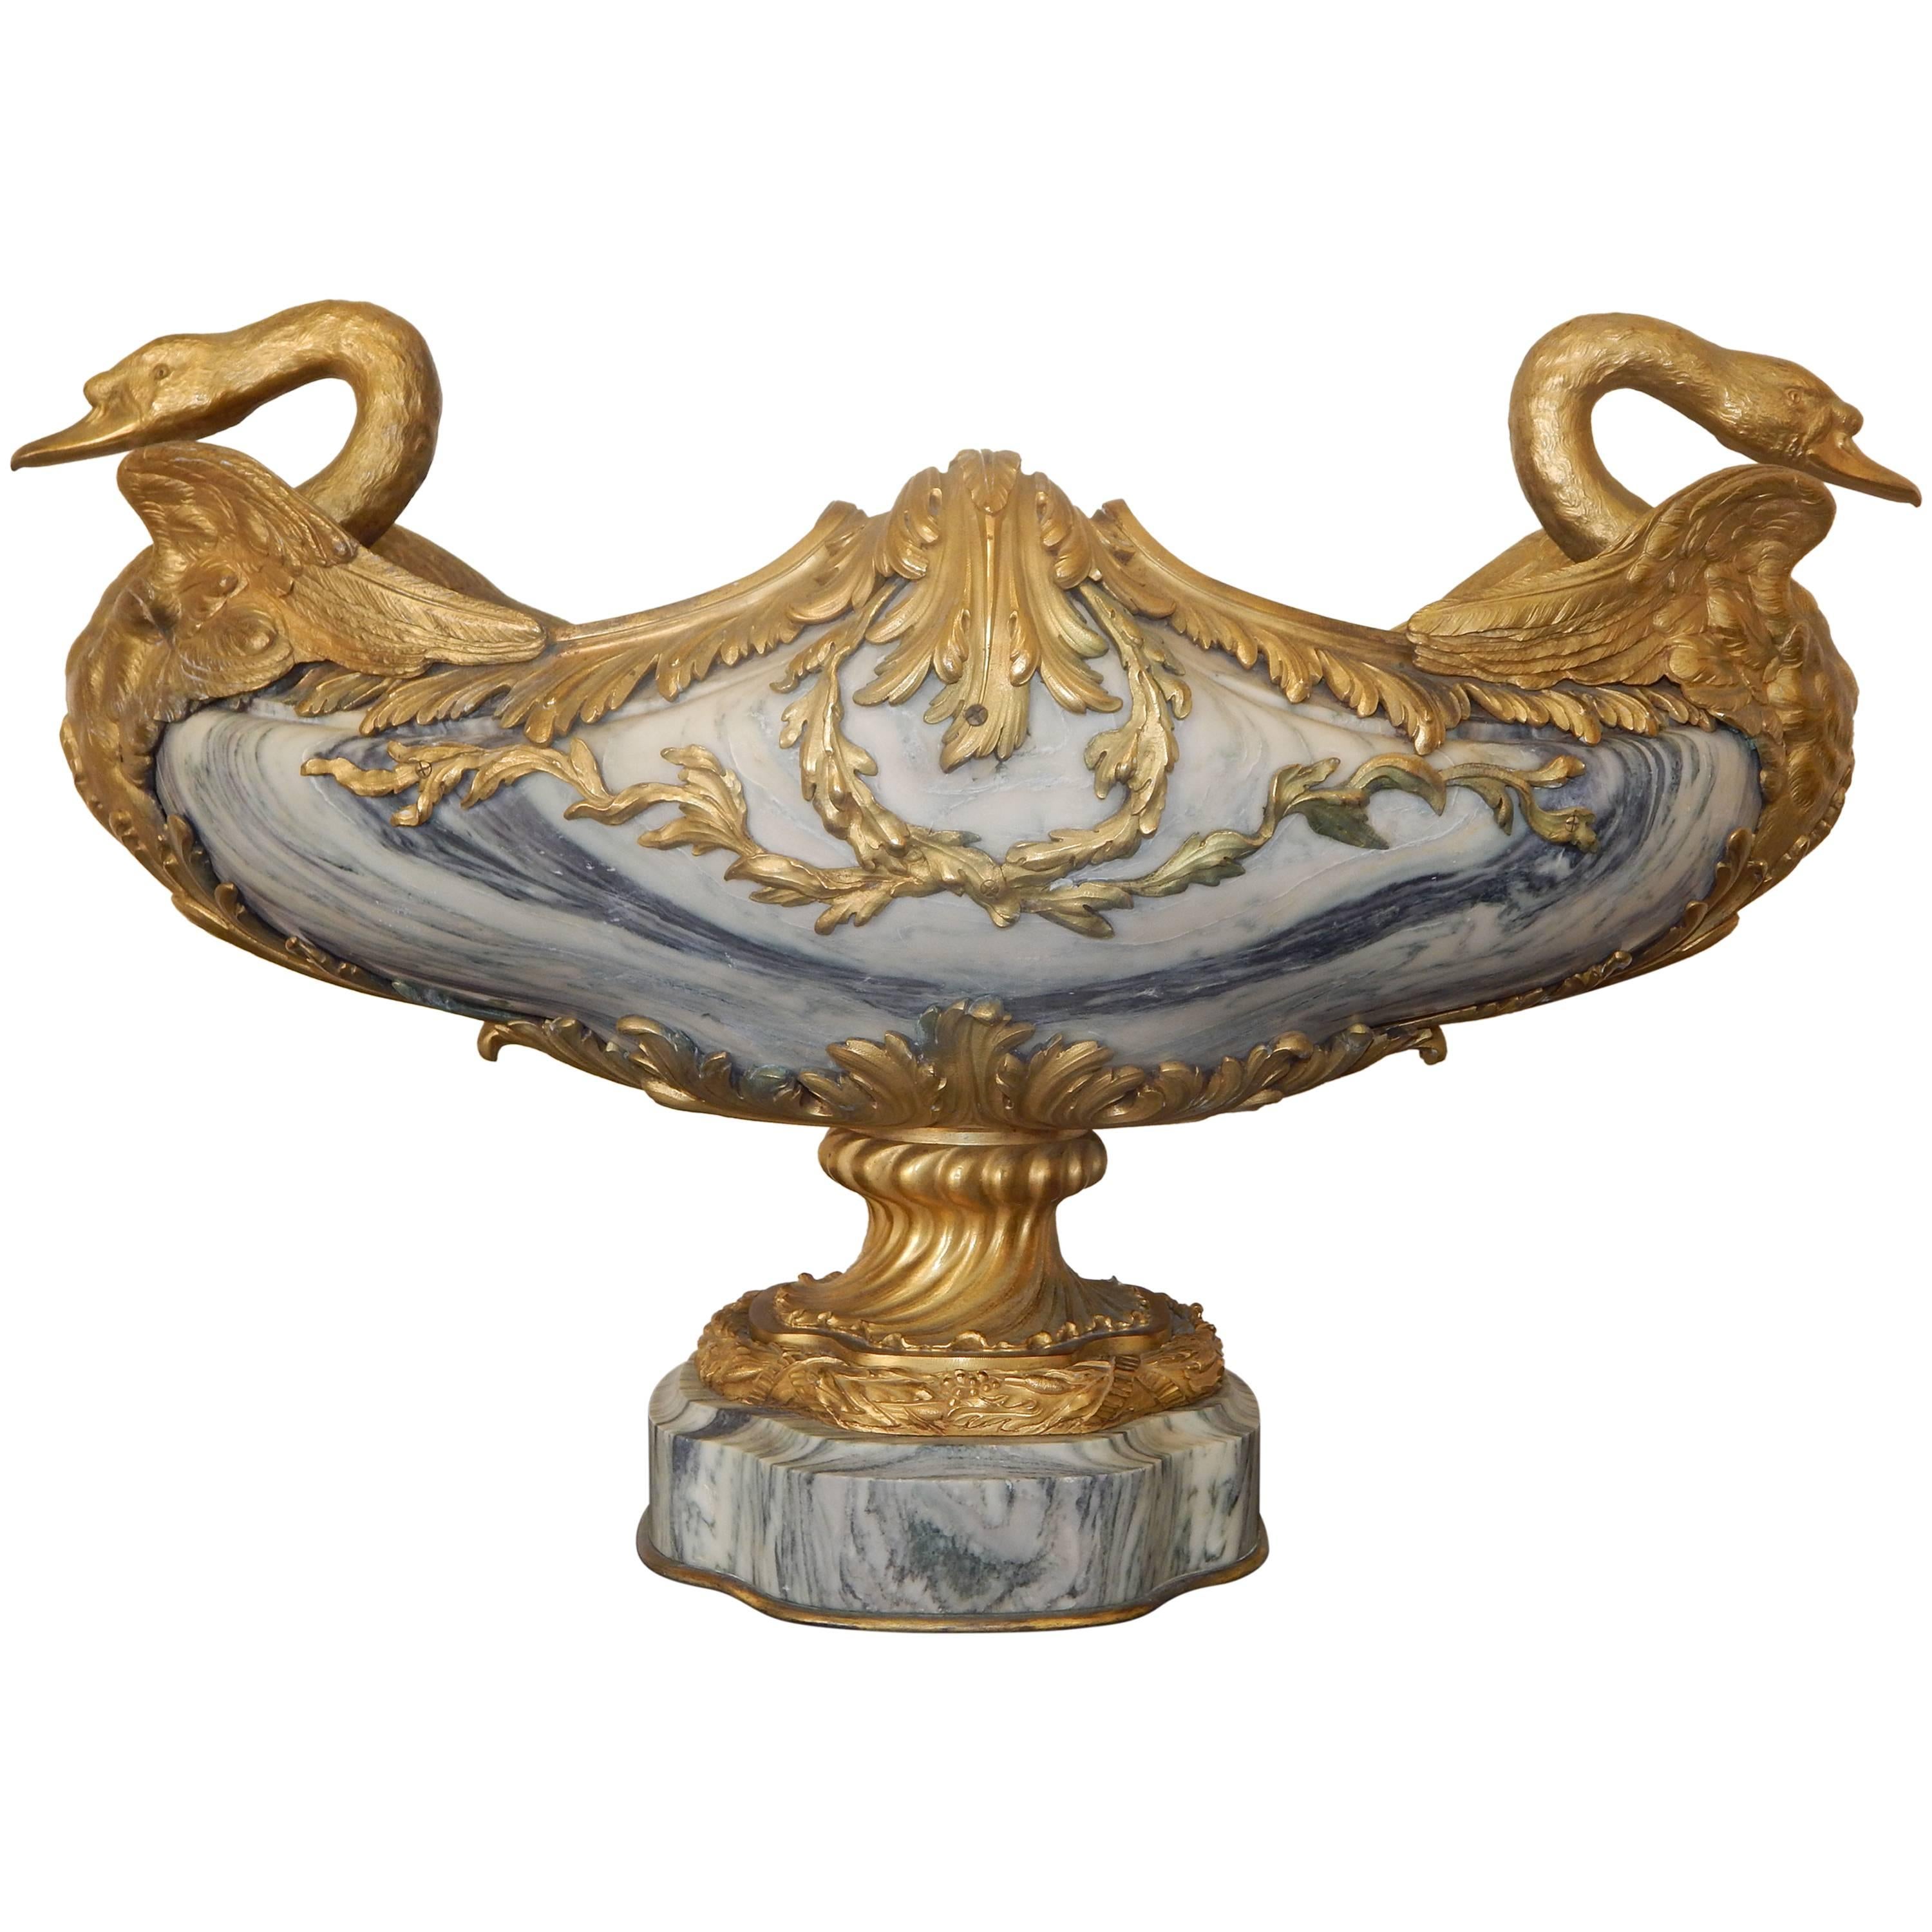 Exquisite Bronze Mounted Marble Centerpiece with Swans For Sale